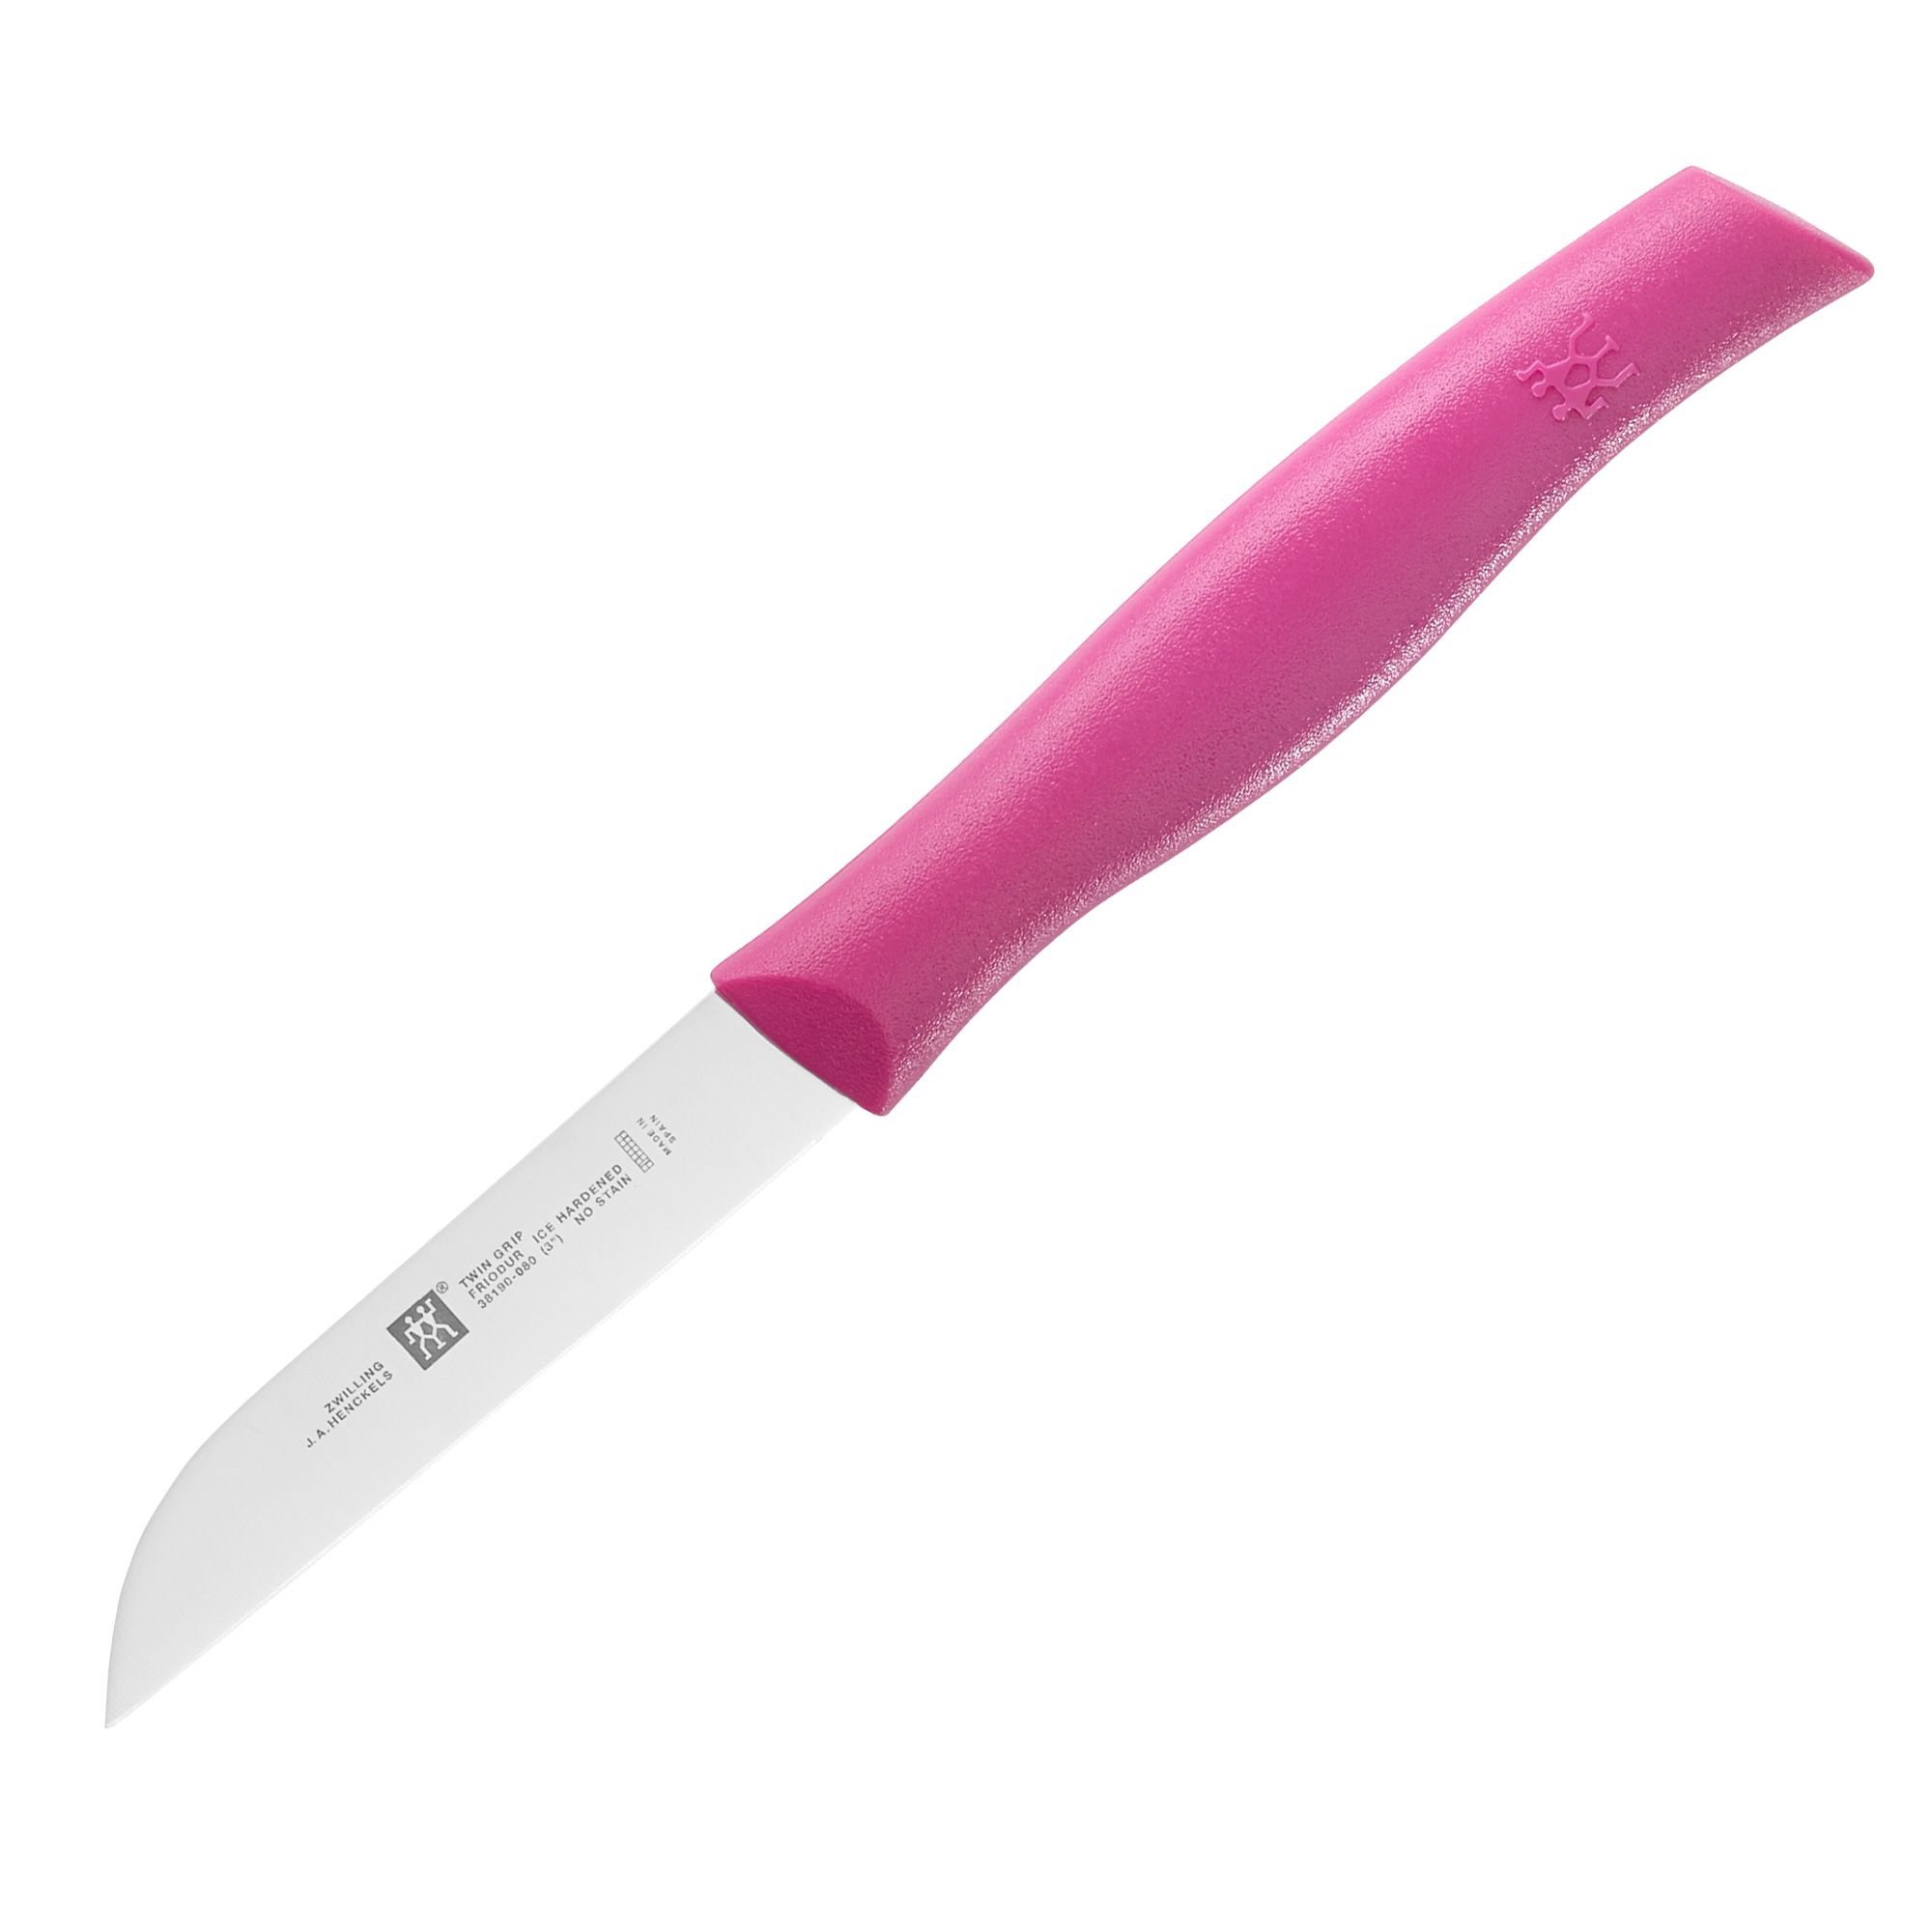 Zwilling - TWIN Grip paring knfe 8cm, pink